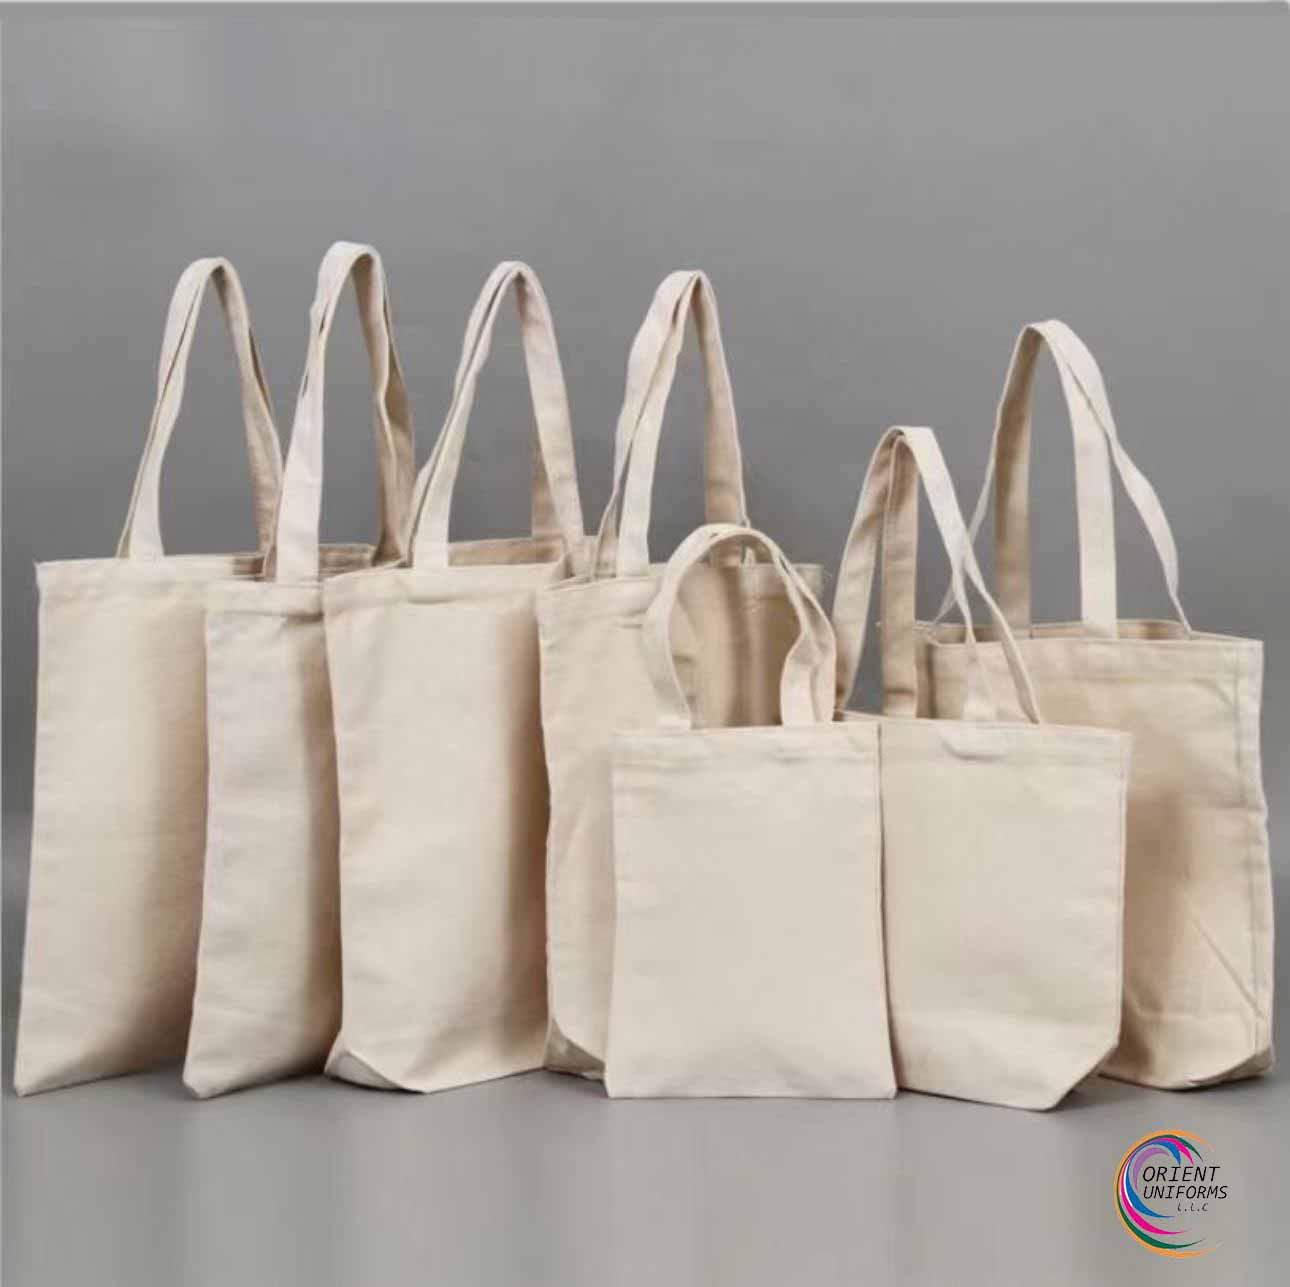 tote-bags-wholesale